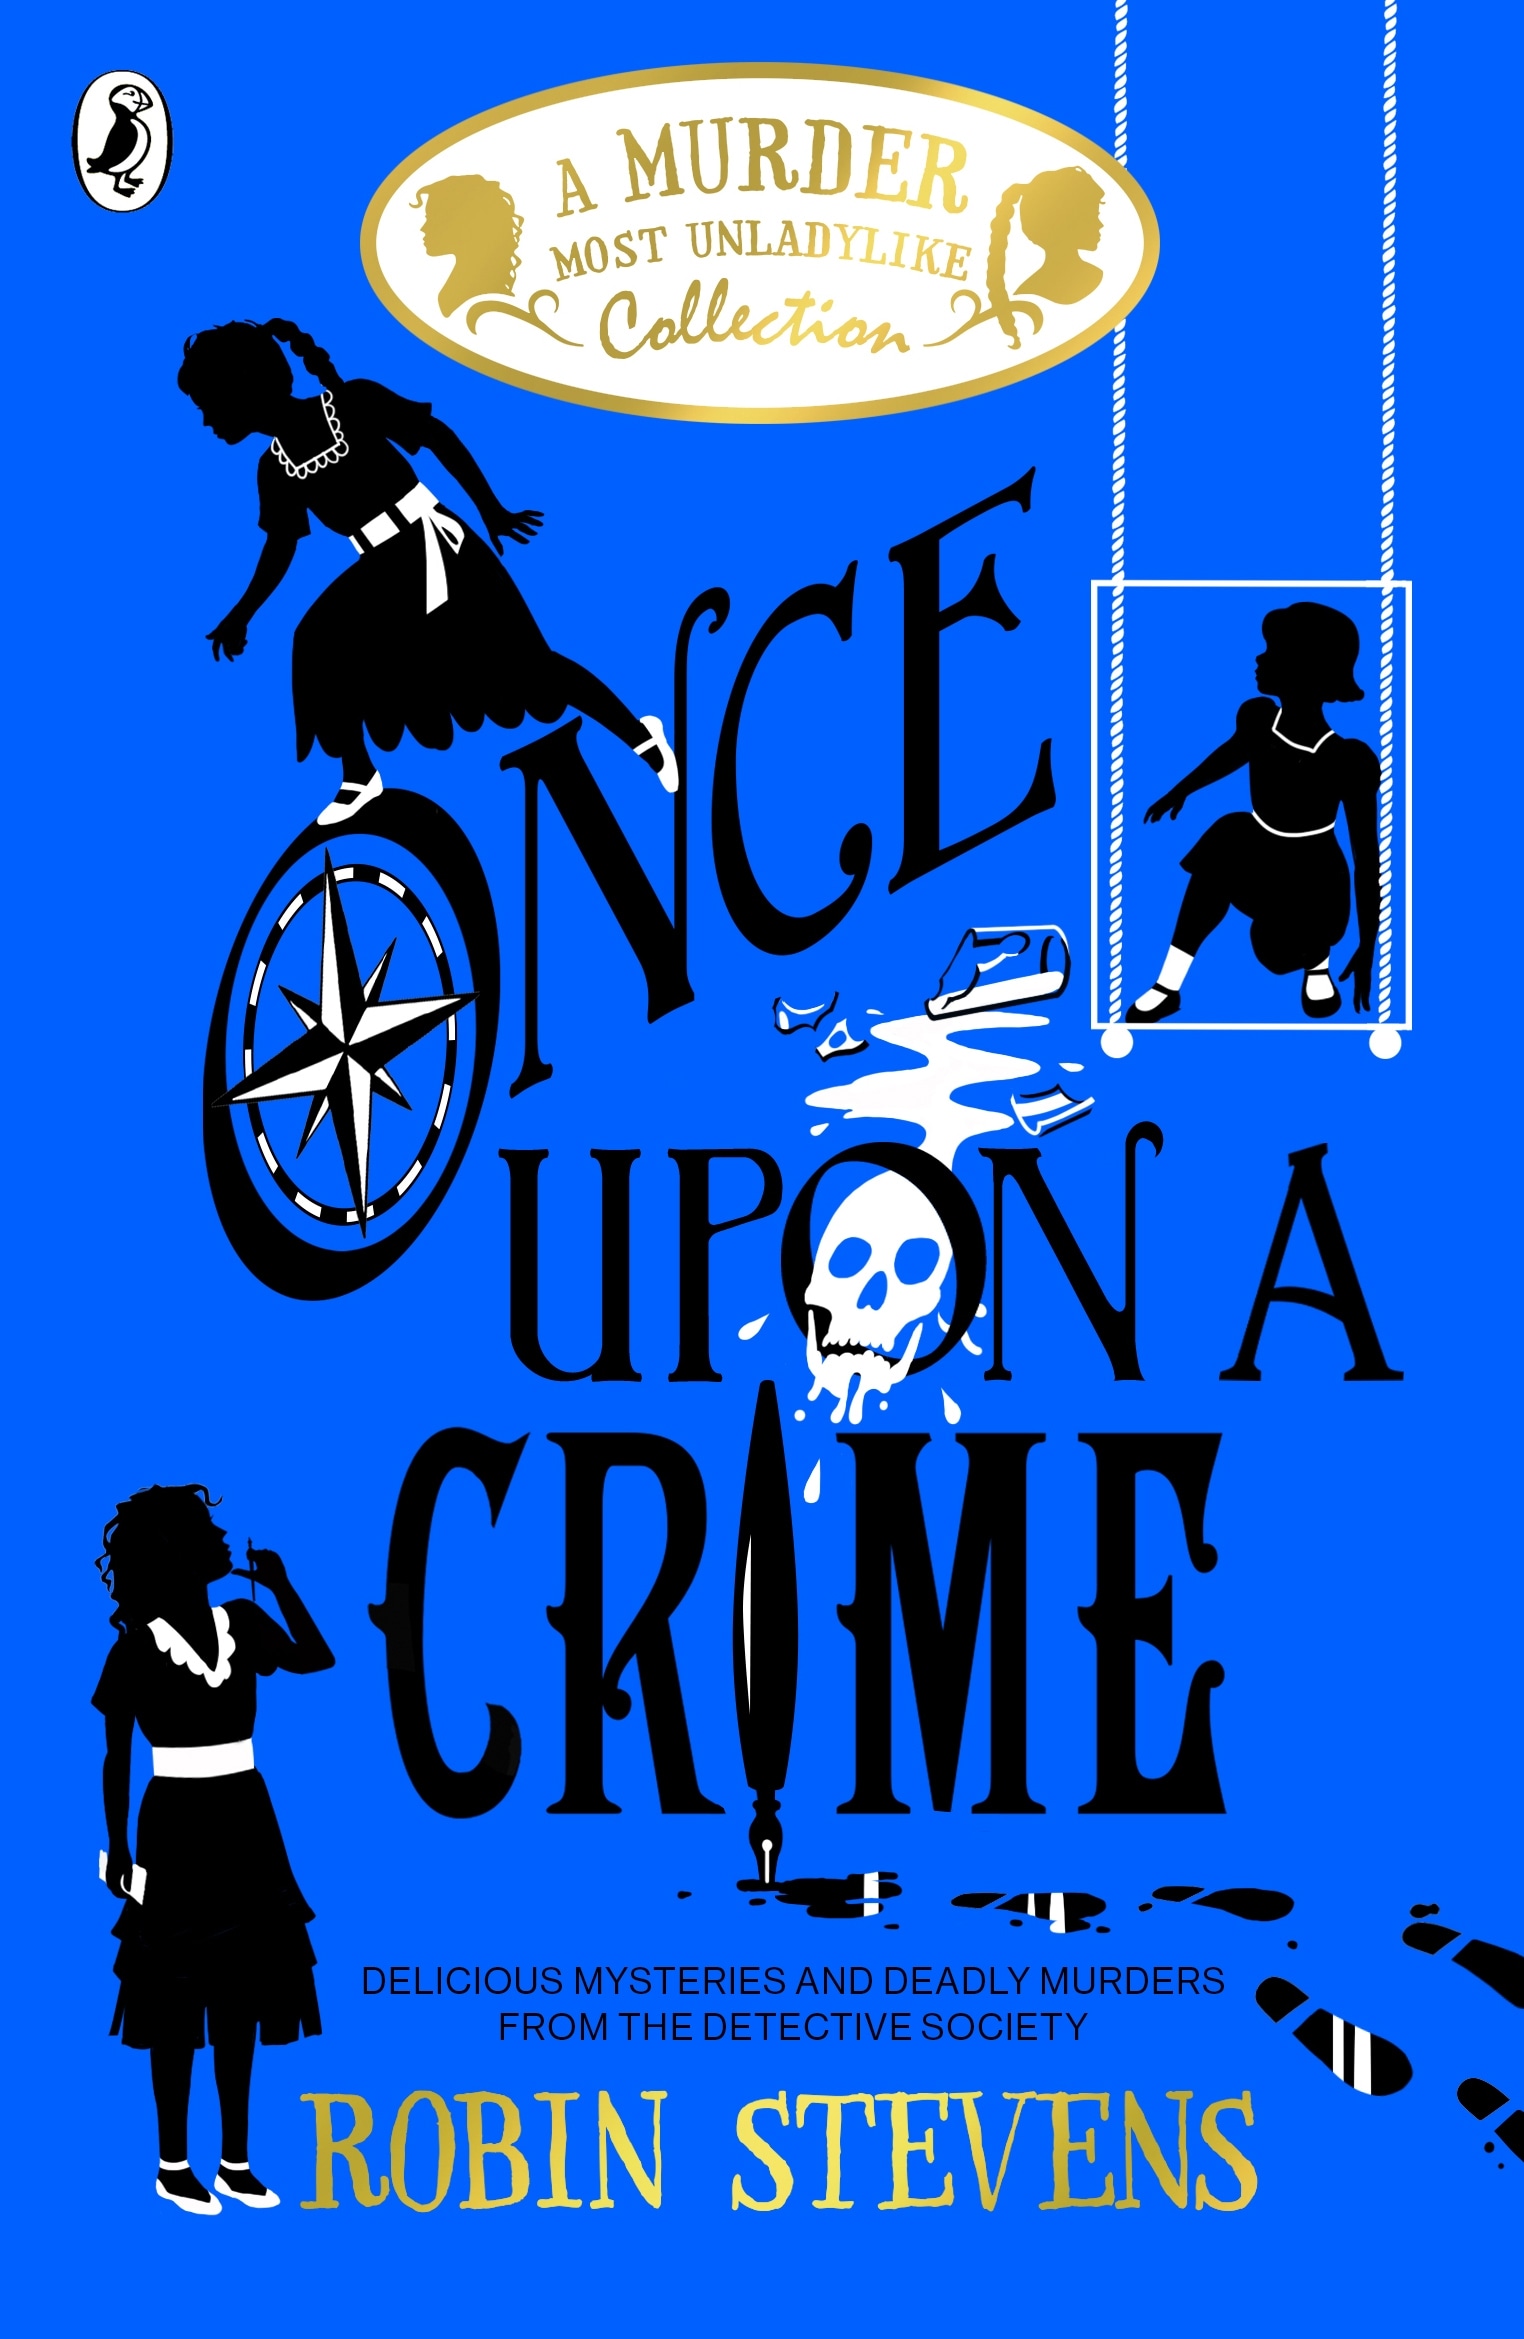 Book “Once Upon a Crime” by Robin Stevens — August 5, 2021